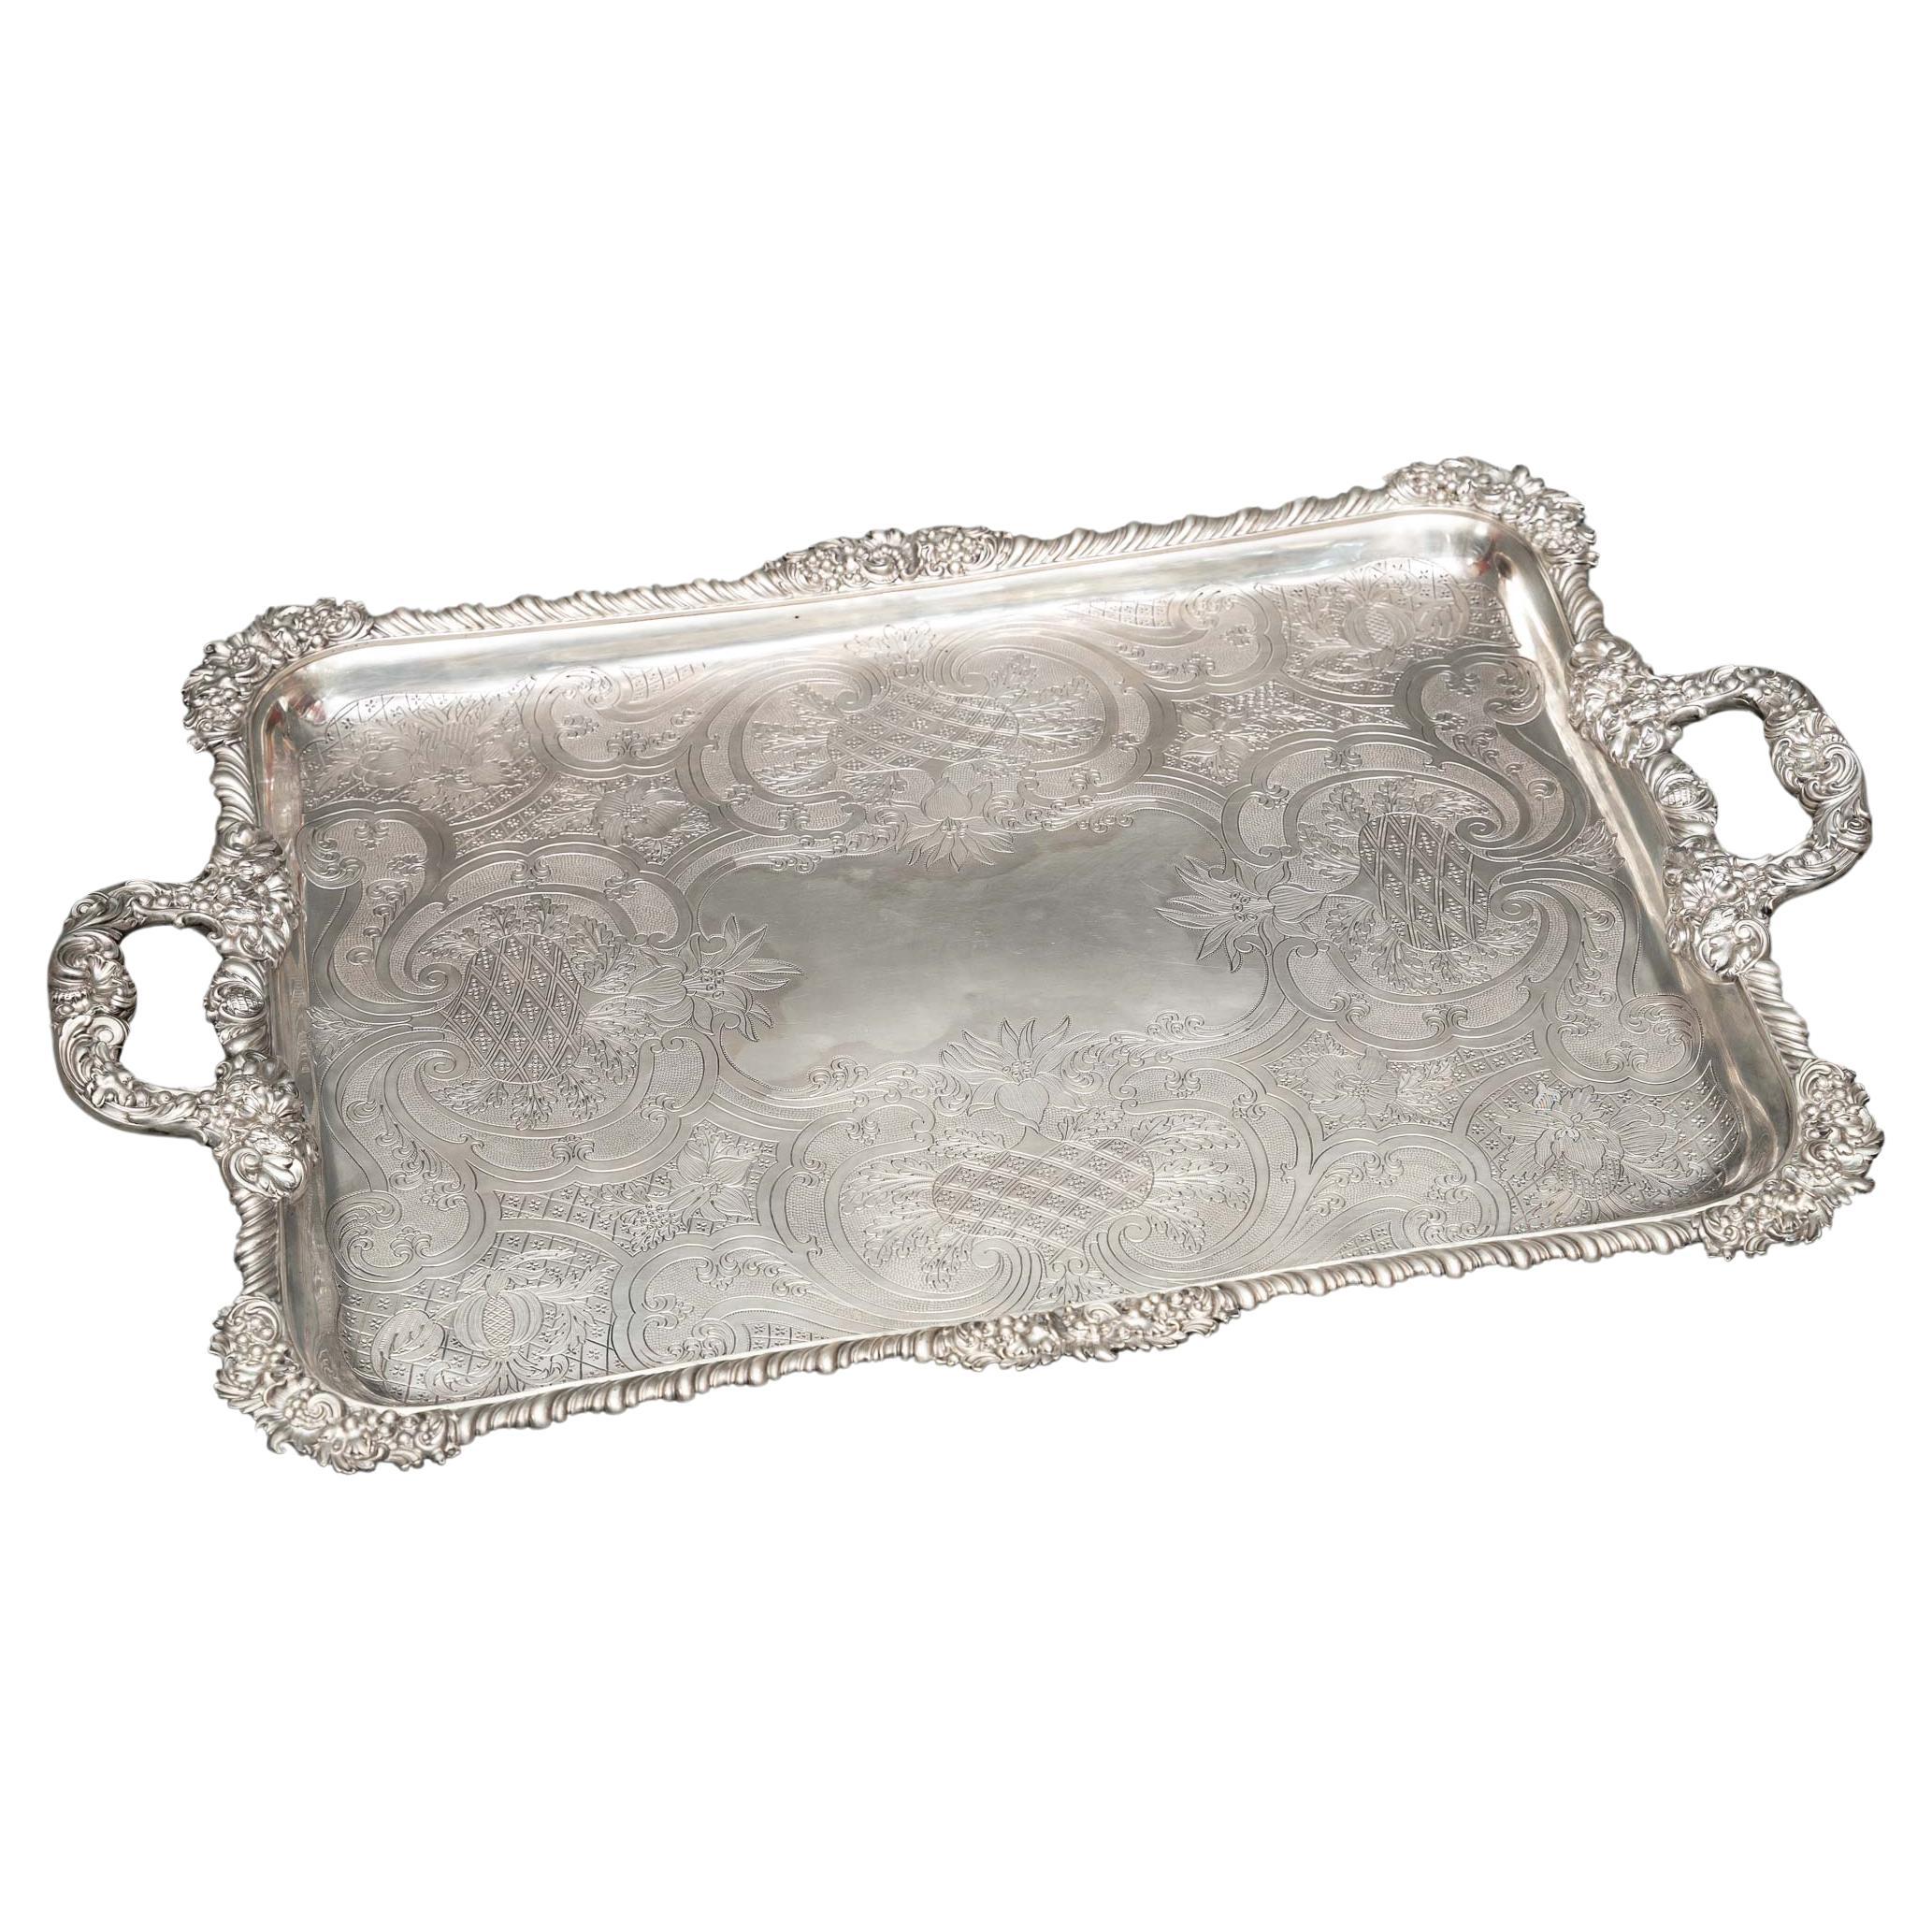 Charles Nicolas Odiot - Important Solid Silver Tray Circa 1840/1860 For Sale